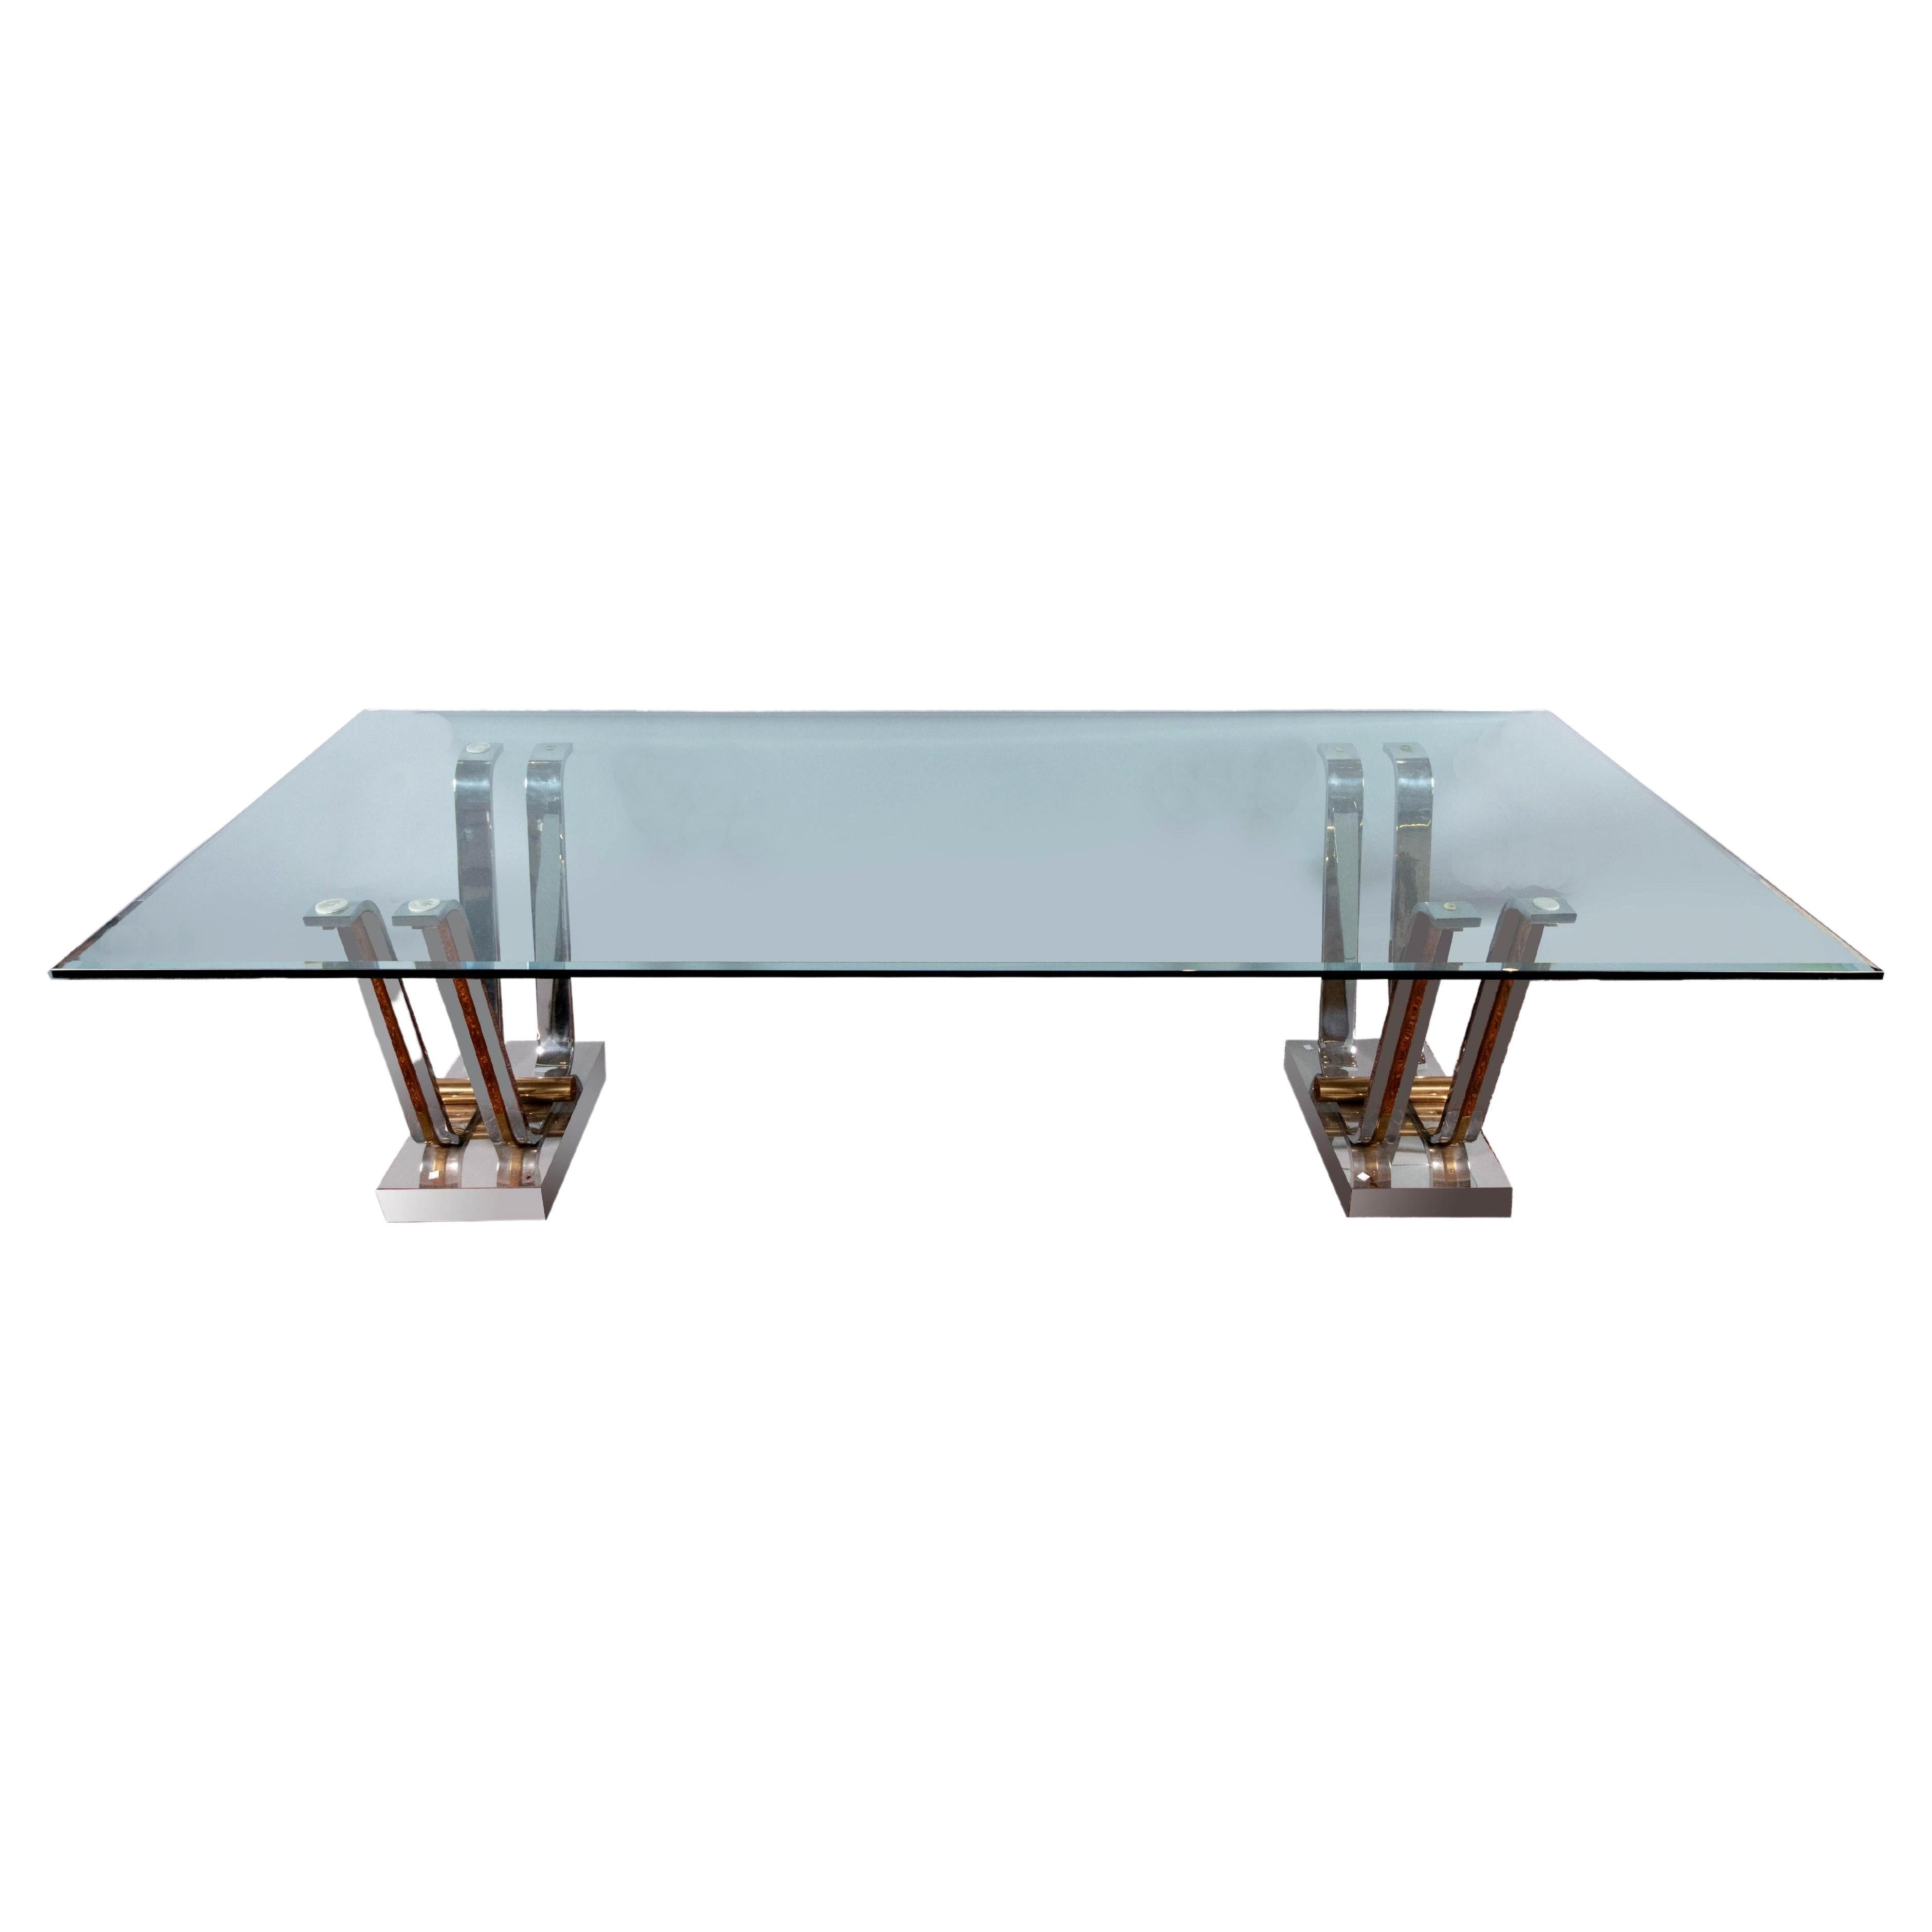 Pair of metal tulip table bases designed and manufactured by Karl Springer, Ltd circa 1970-80s. The bases are currently configured as a pair of console tables with new beveled glass tops (0.5 inch thick and included if wish). The pair can also be